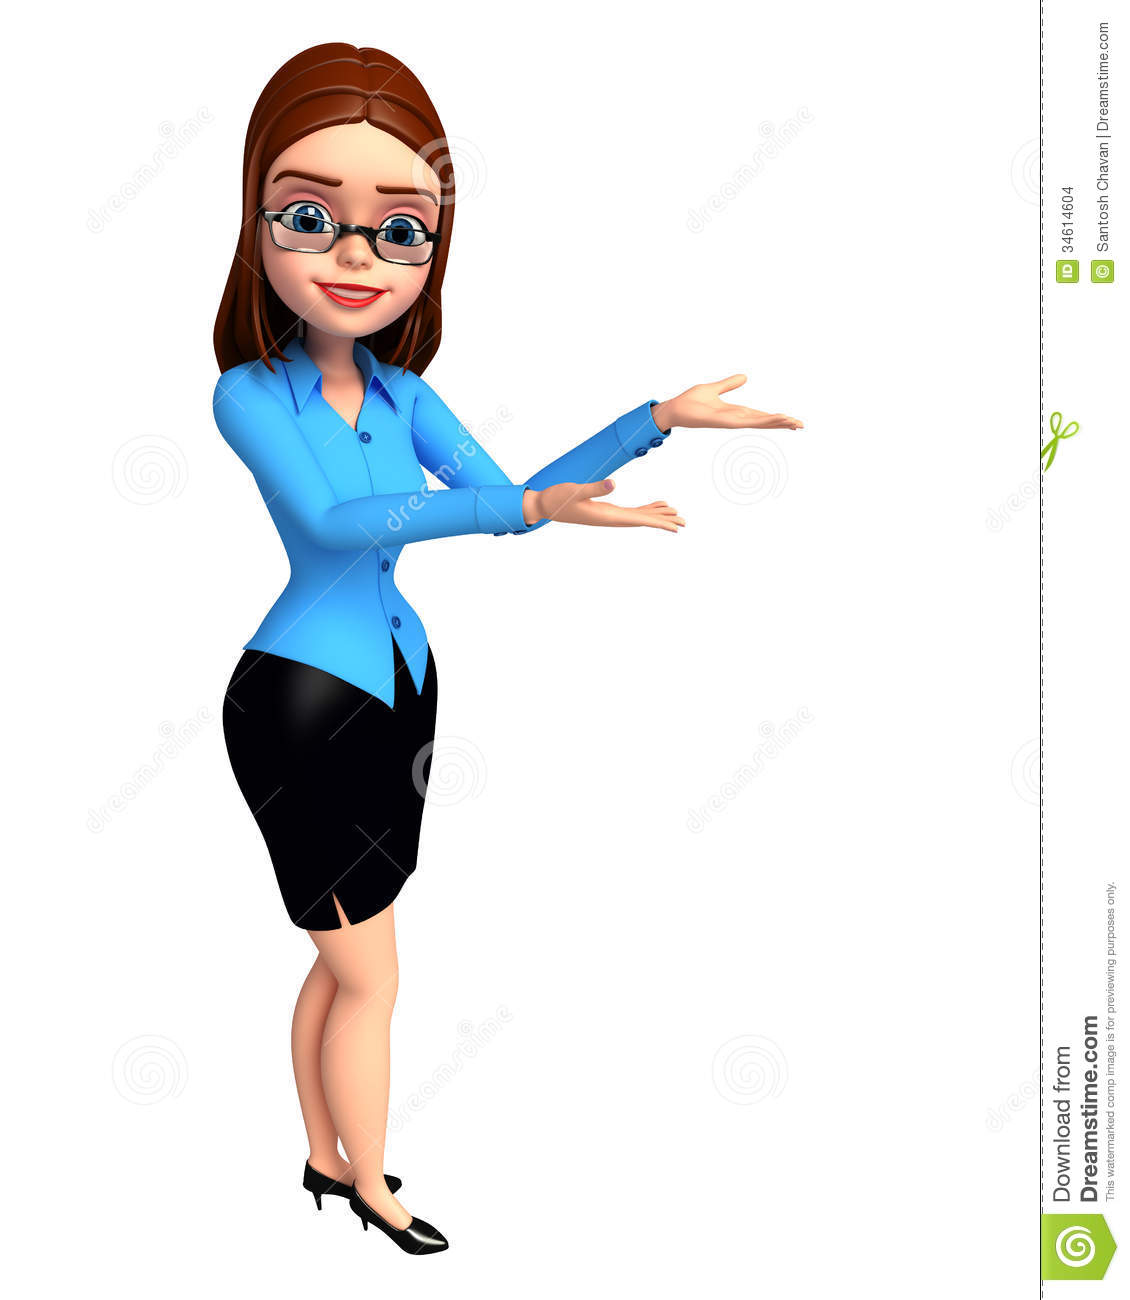 Stock Images  Young Girl Pointing To Blank  Image  34614604